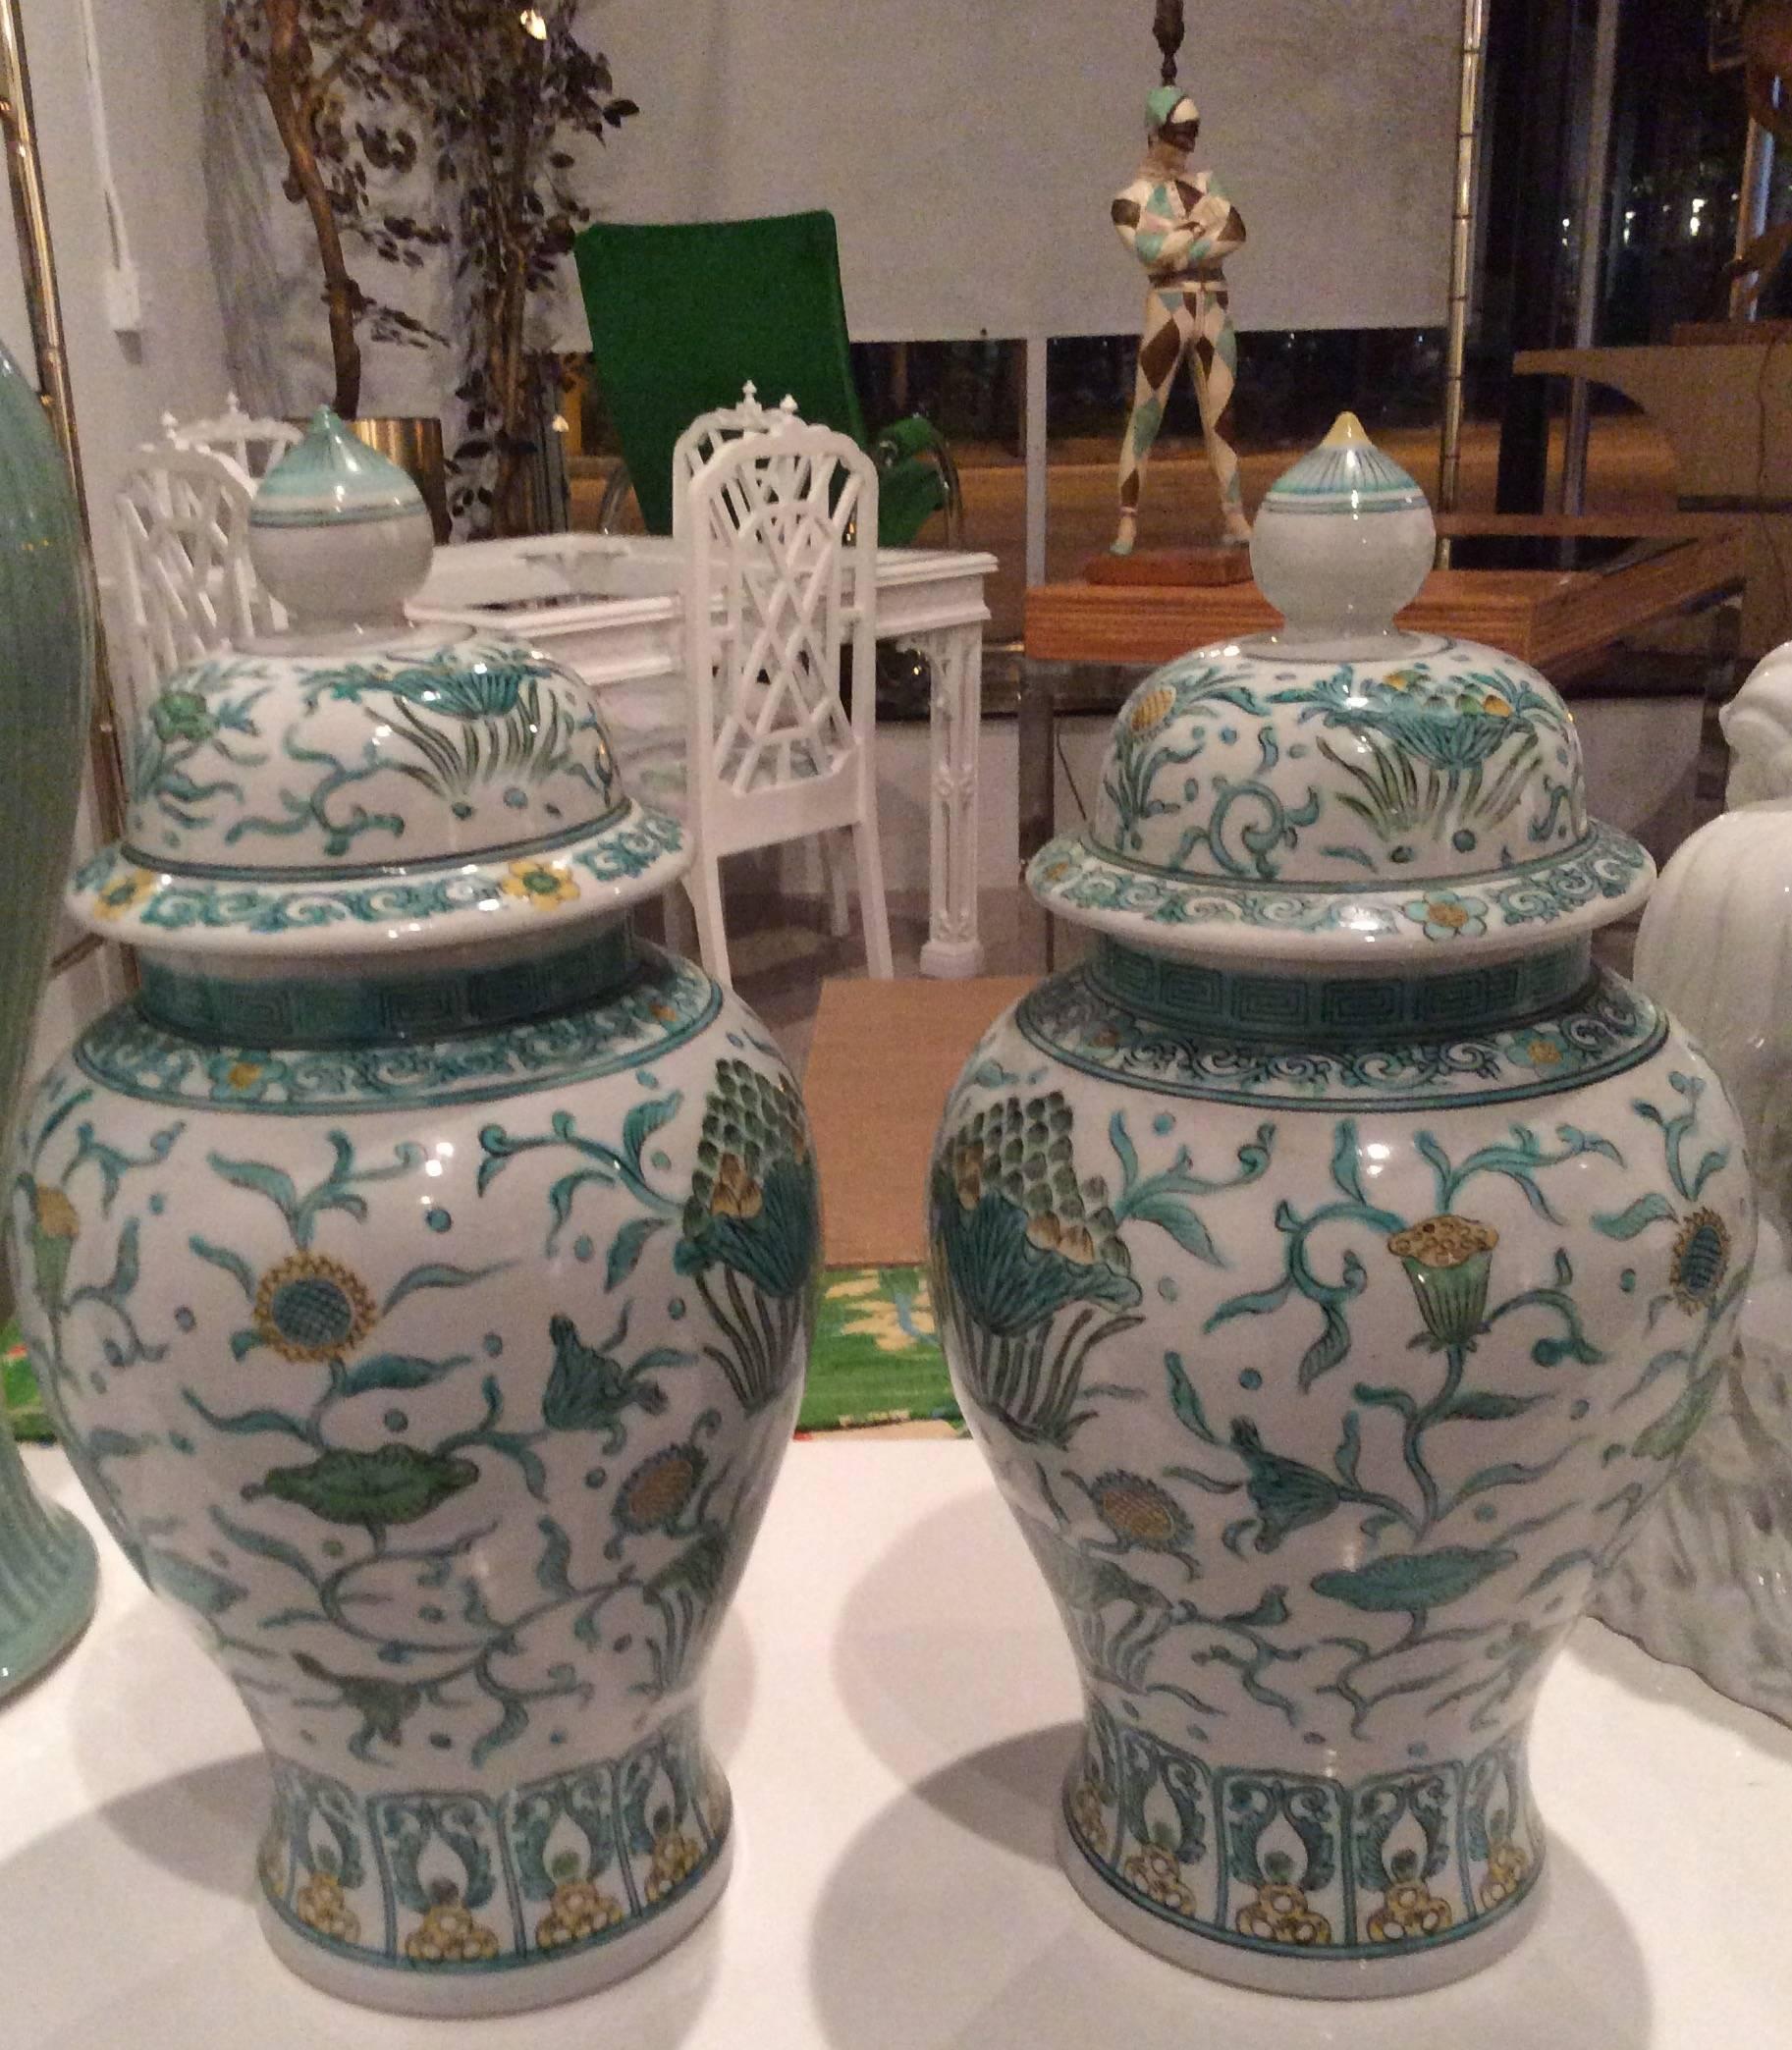 The prettiest pair of Oriental, Asian Ginger Jars with a lovely green and yellow color palette. Great Greek Key design around the neck. Made in Japan, marked and numbered underneath (pictured) No chips or breaks. 